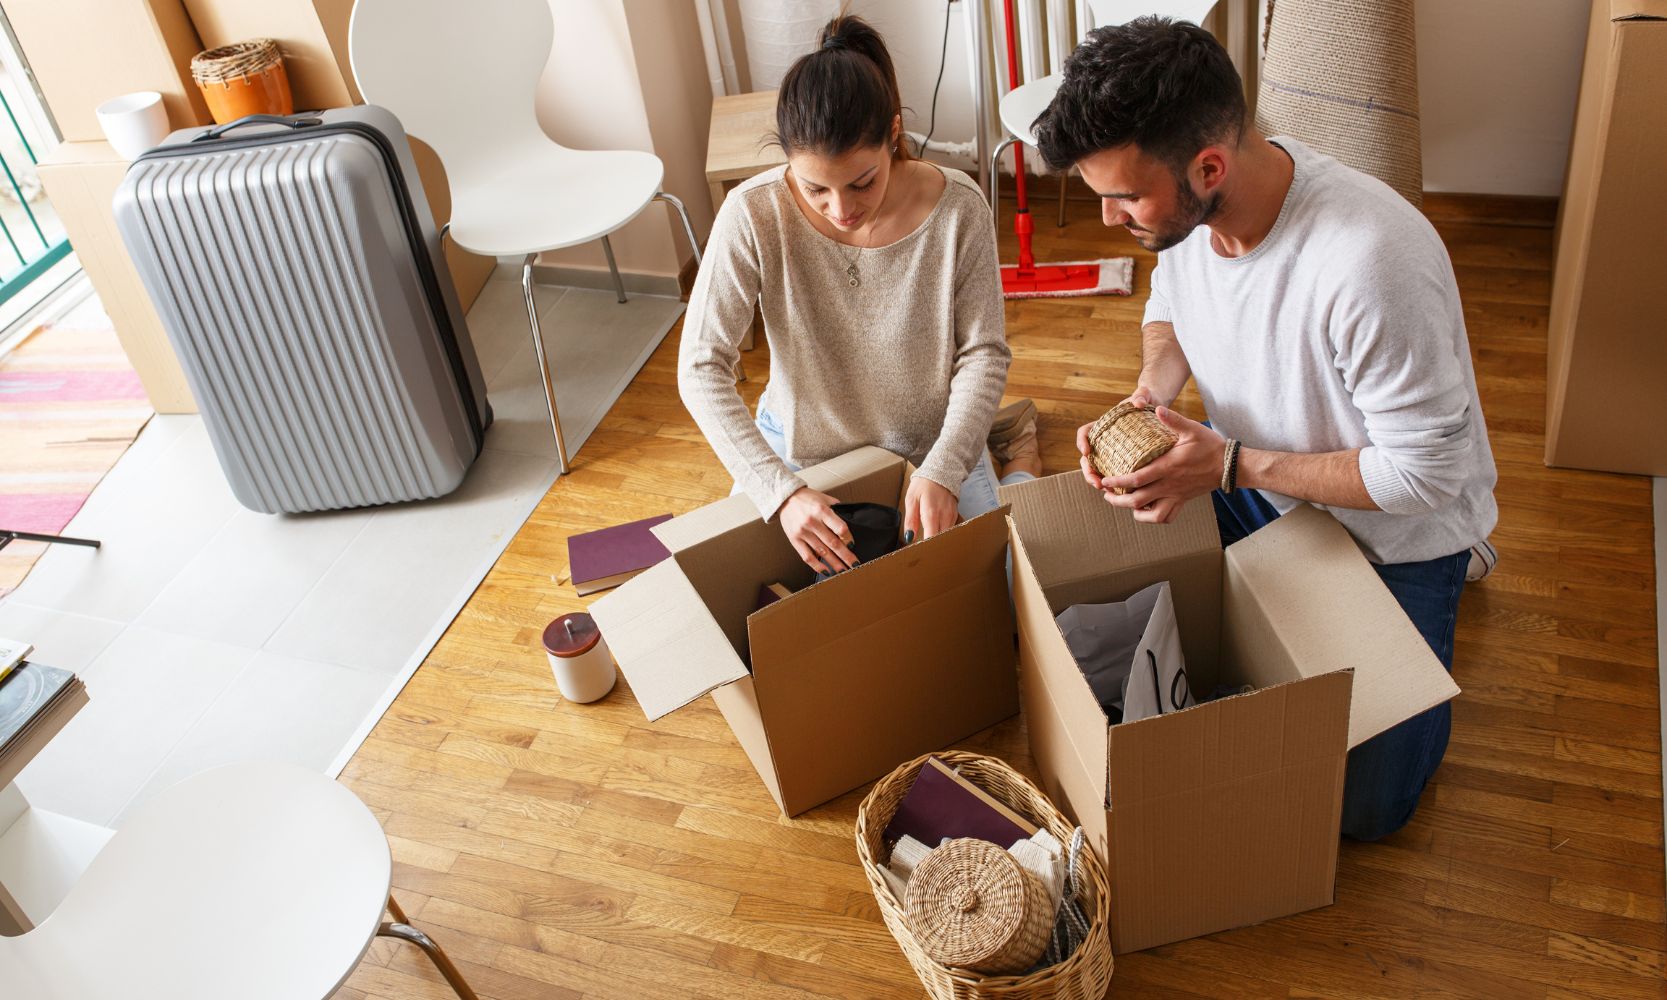 Image of a couple unpacking their boxes in their new apartment home